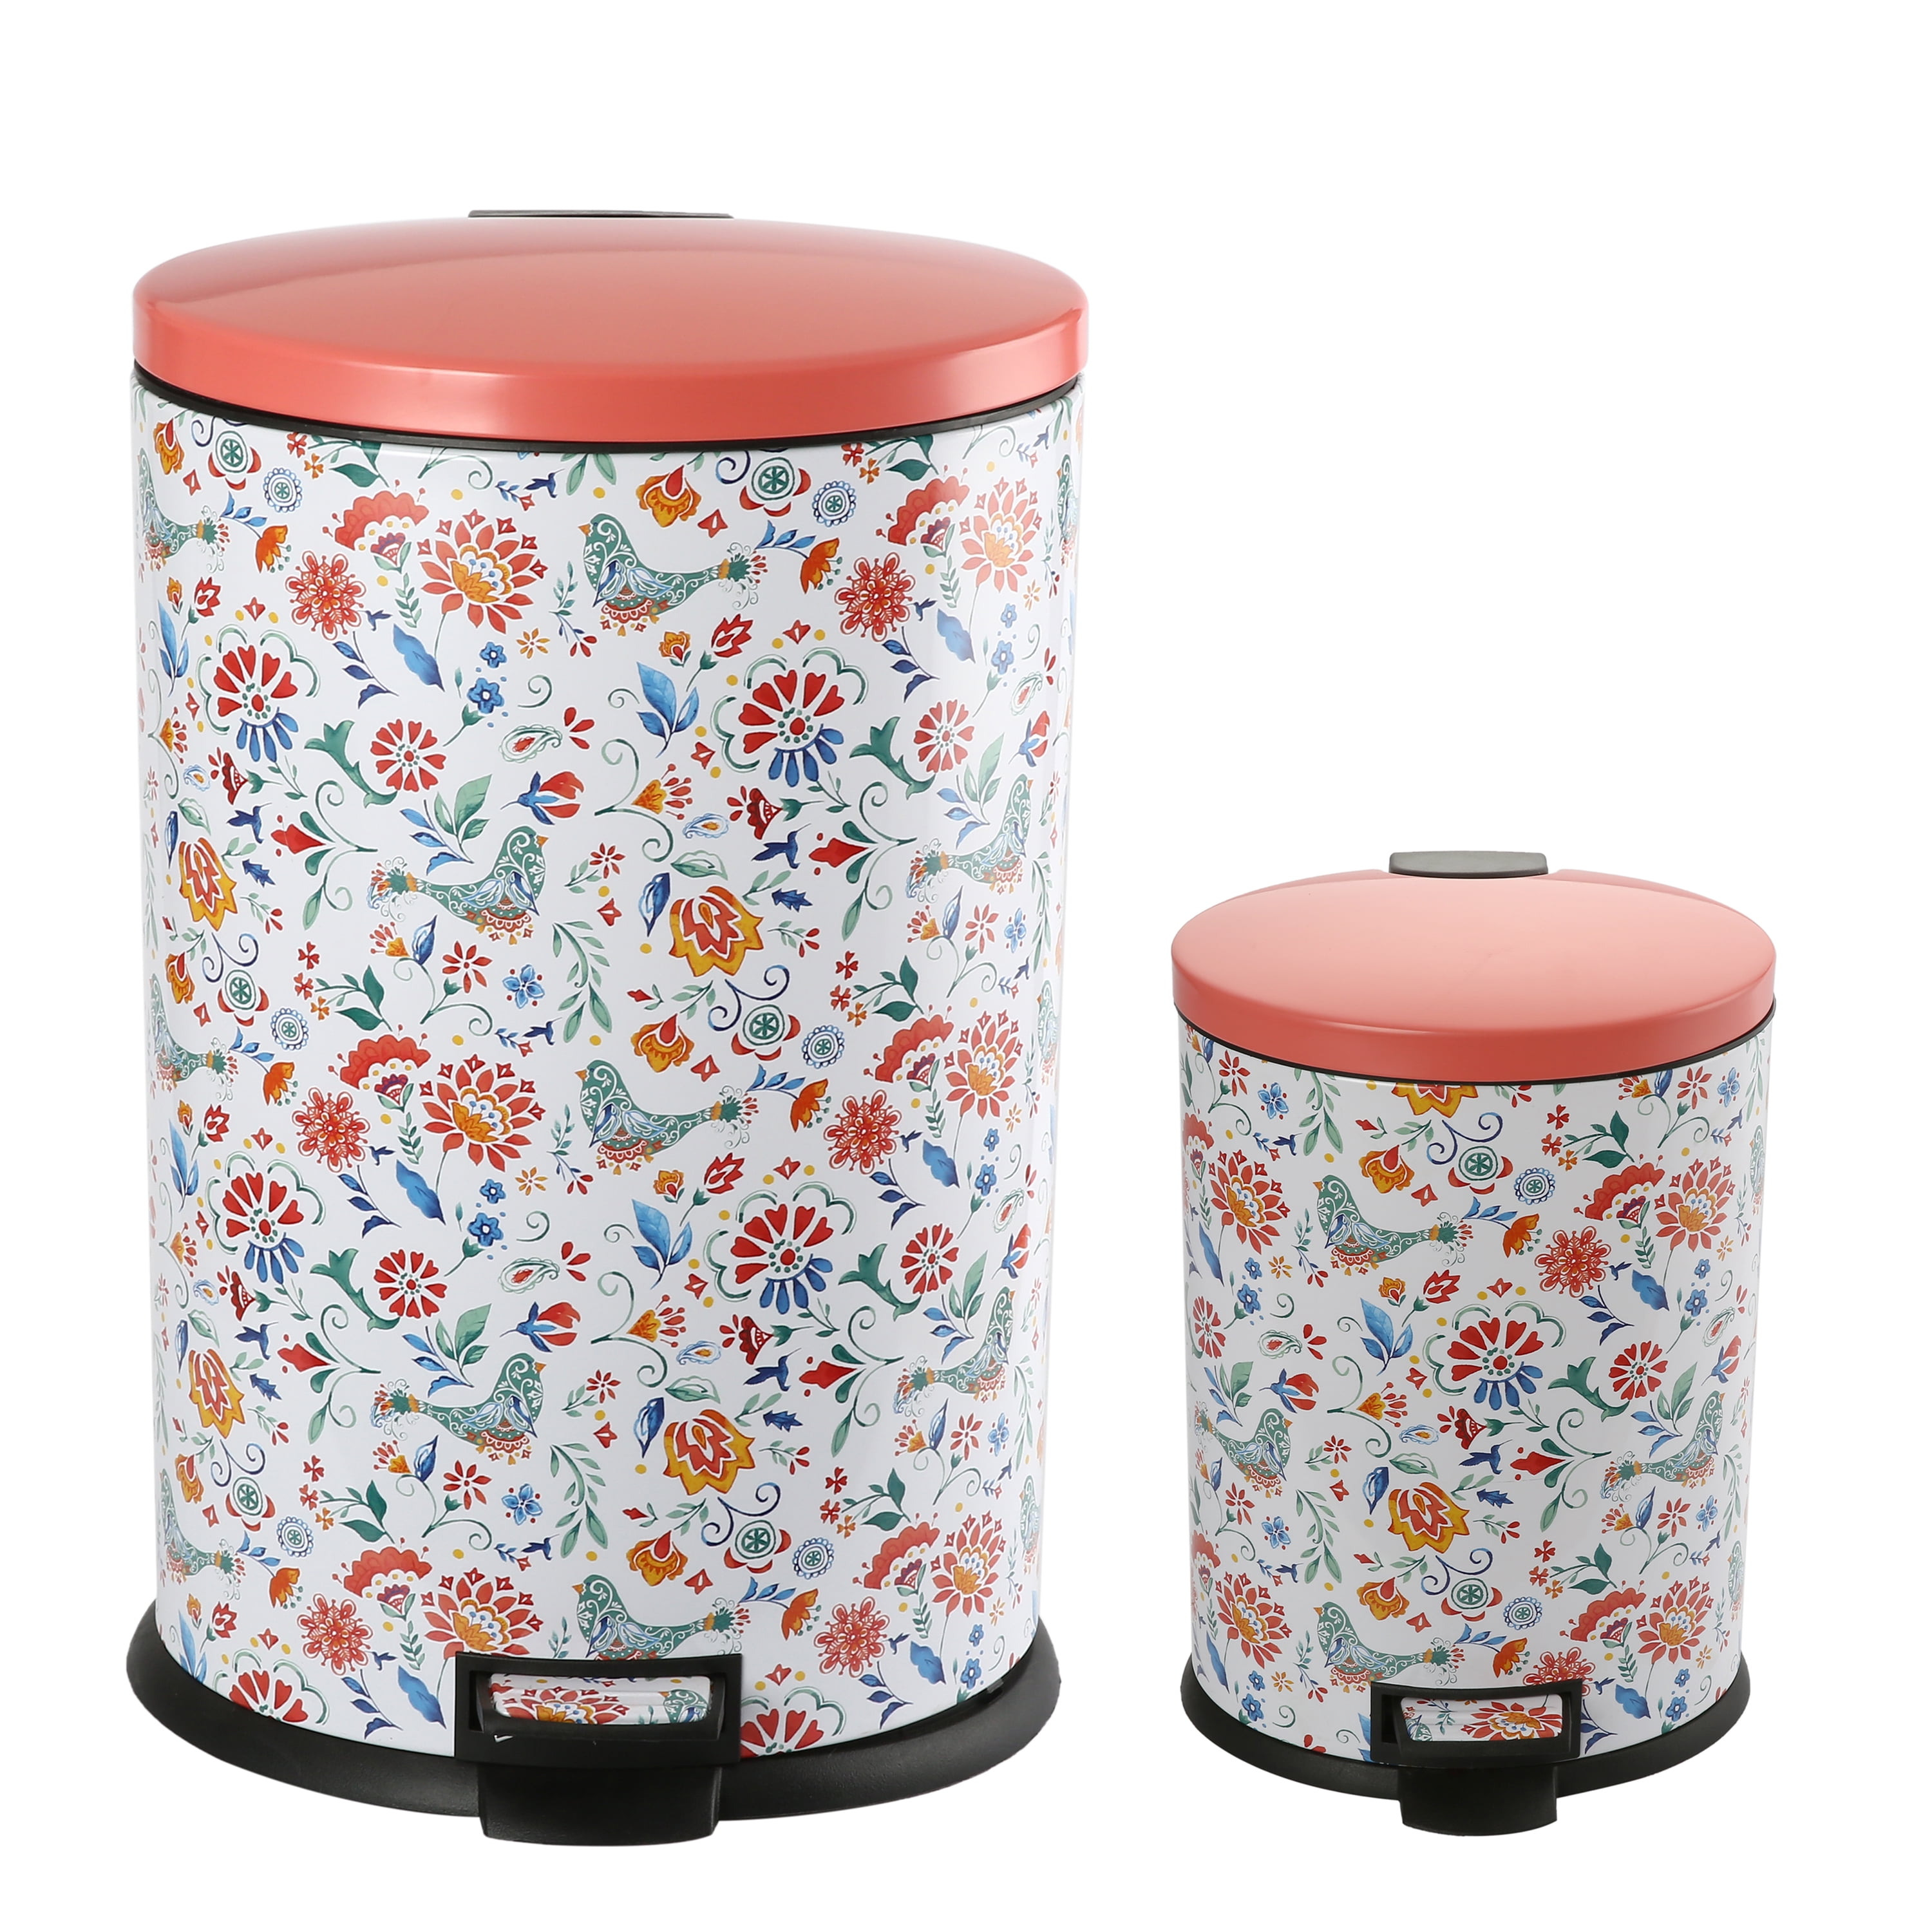 Pioneer Woman Stainless Steel 10.5 Gal and 3.1 Gal Oval Trashcan Set Color Pink 